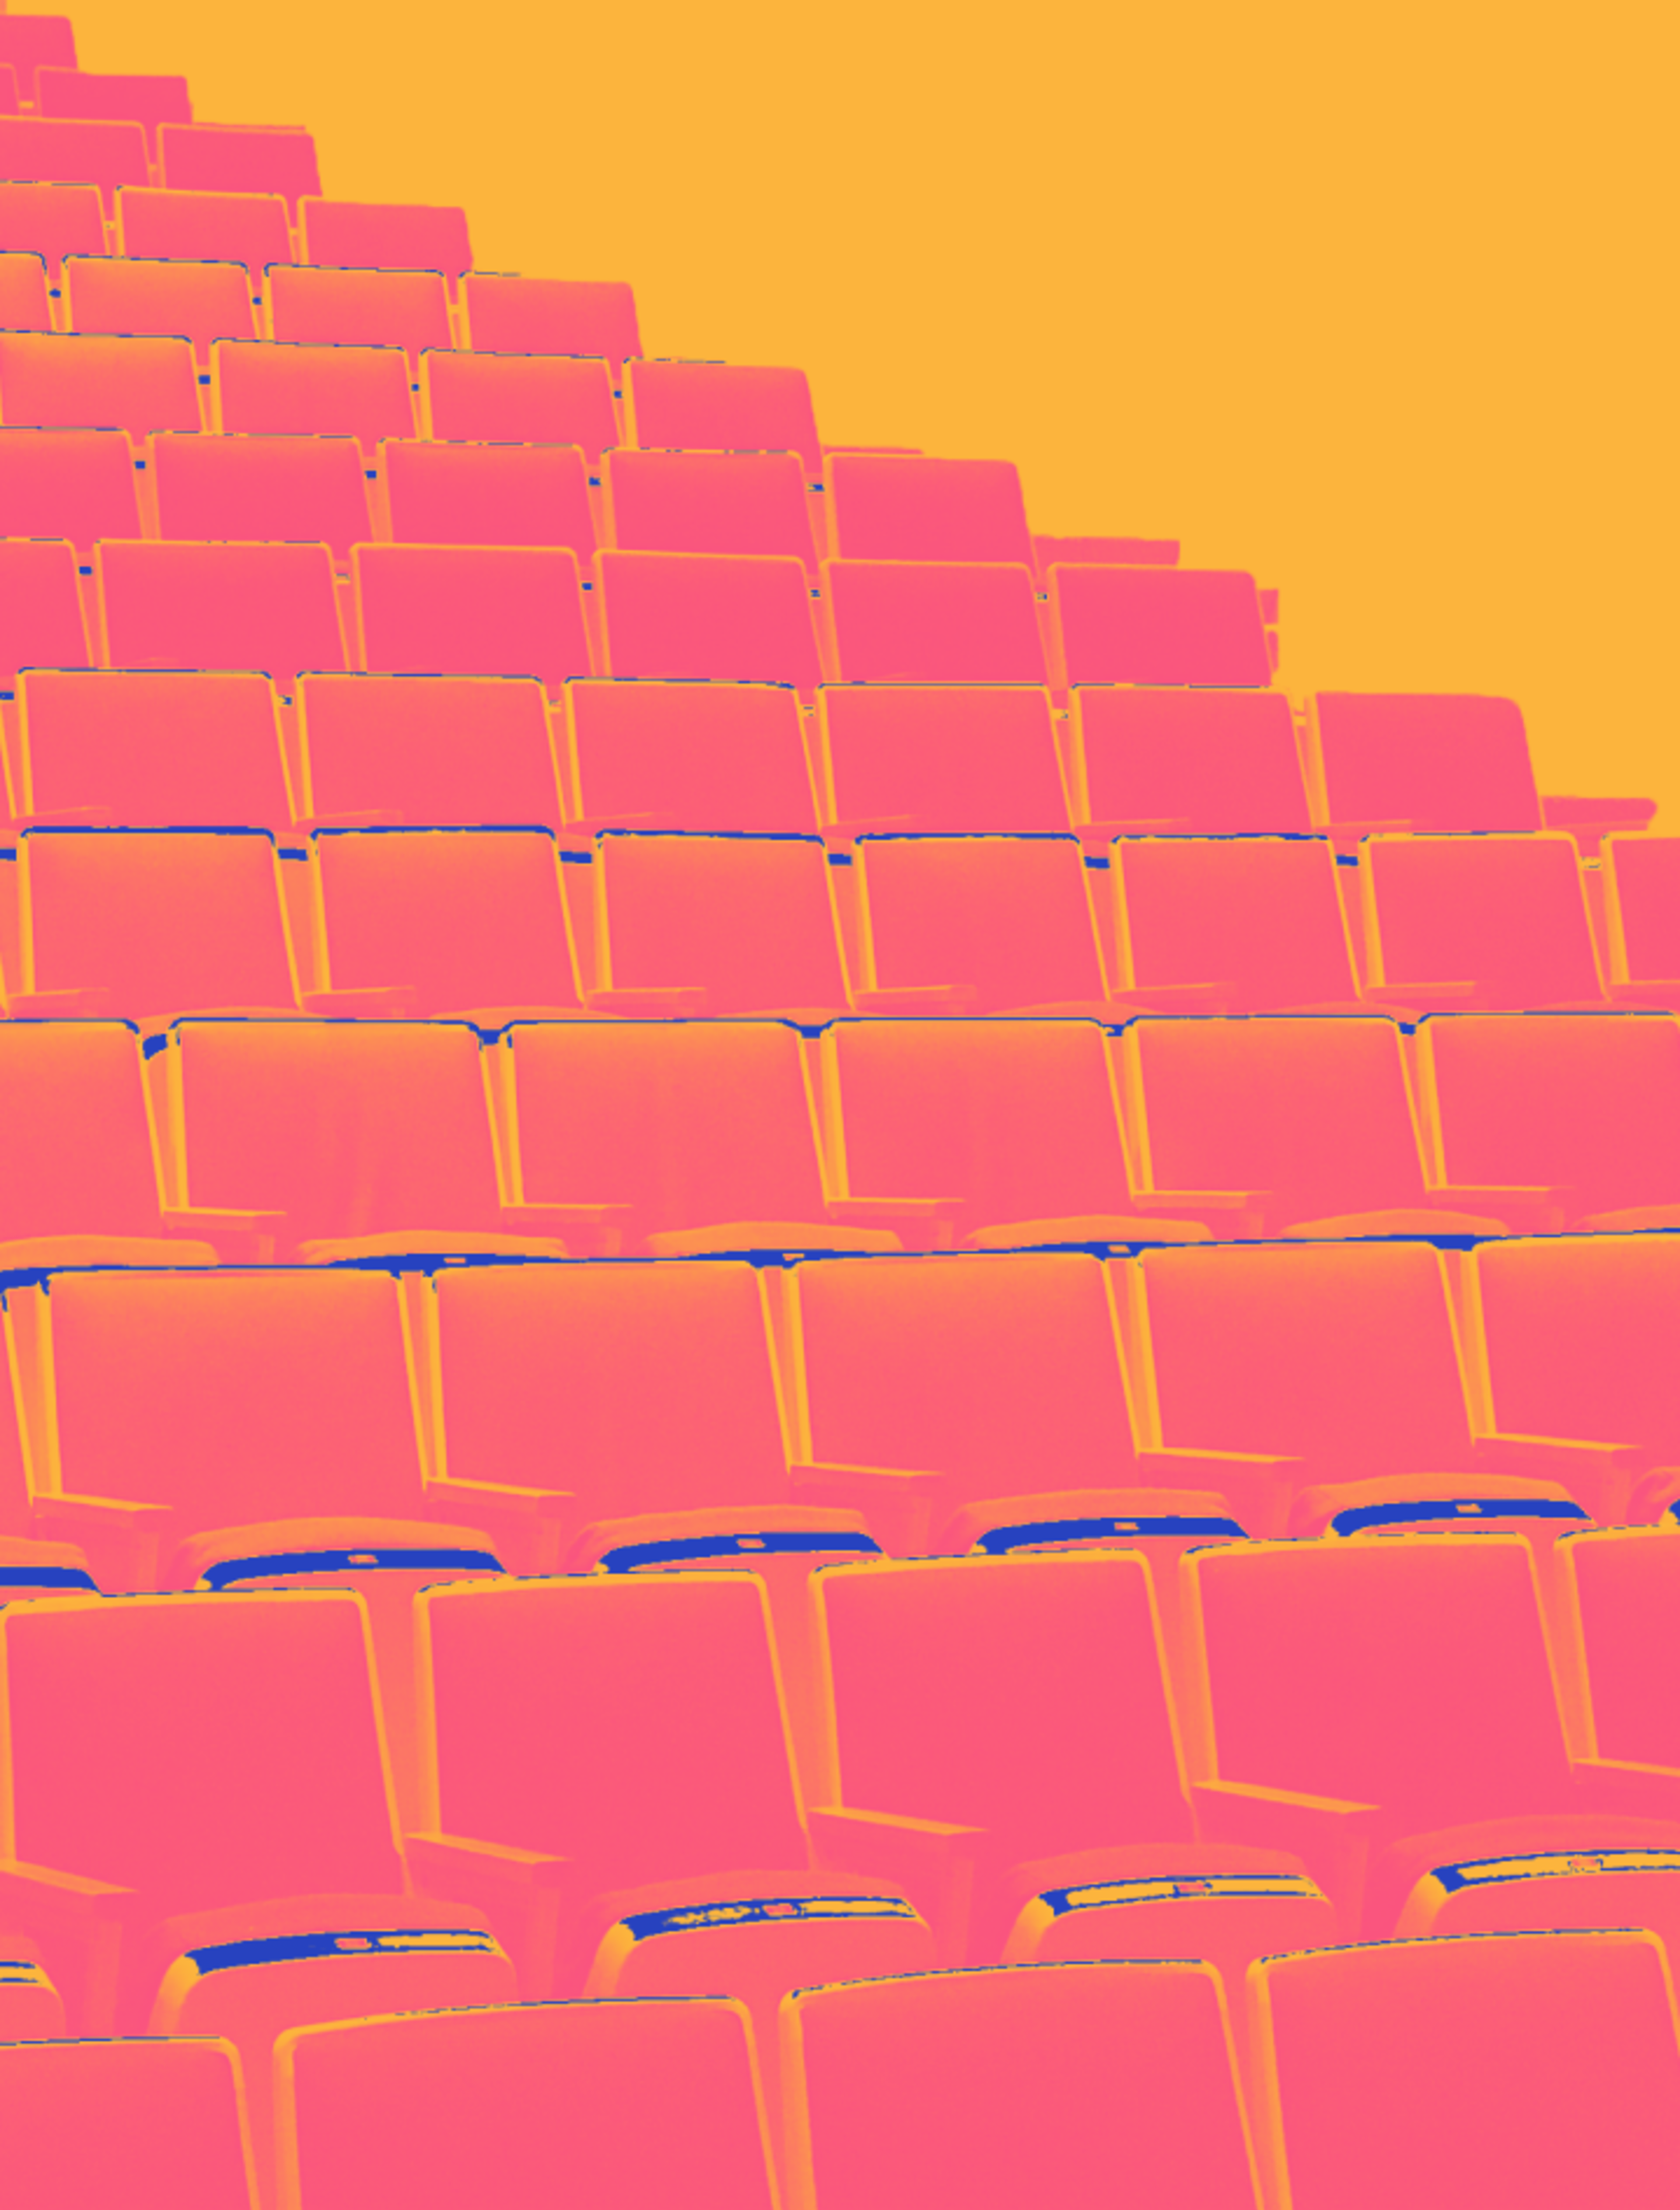 An image of rows of seats in a theater, meant to covey the idea of an audience.